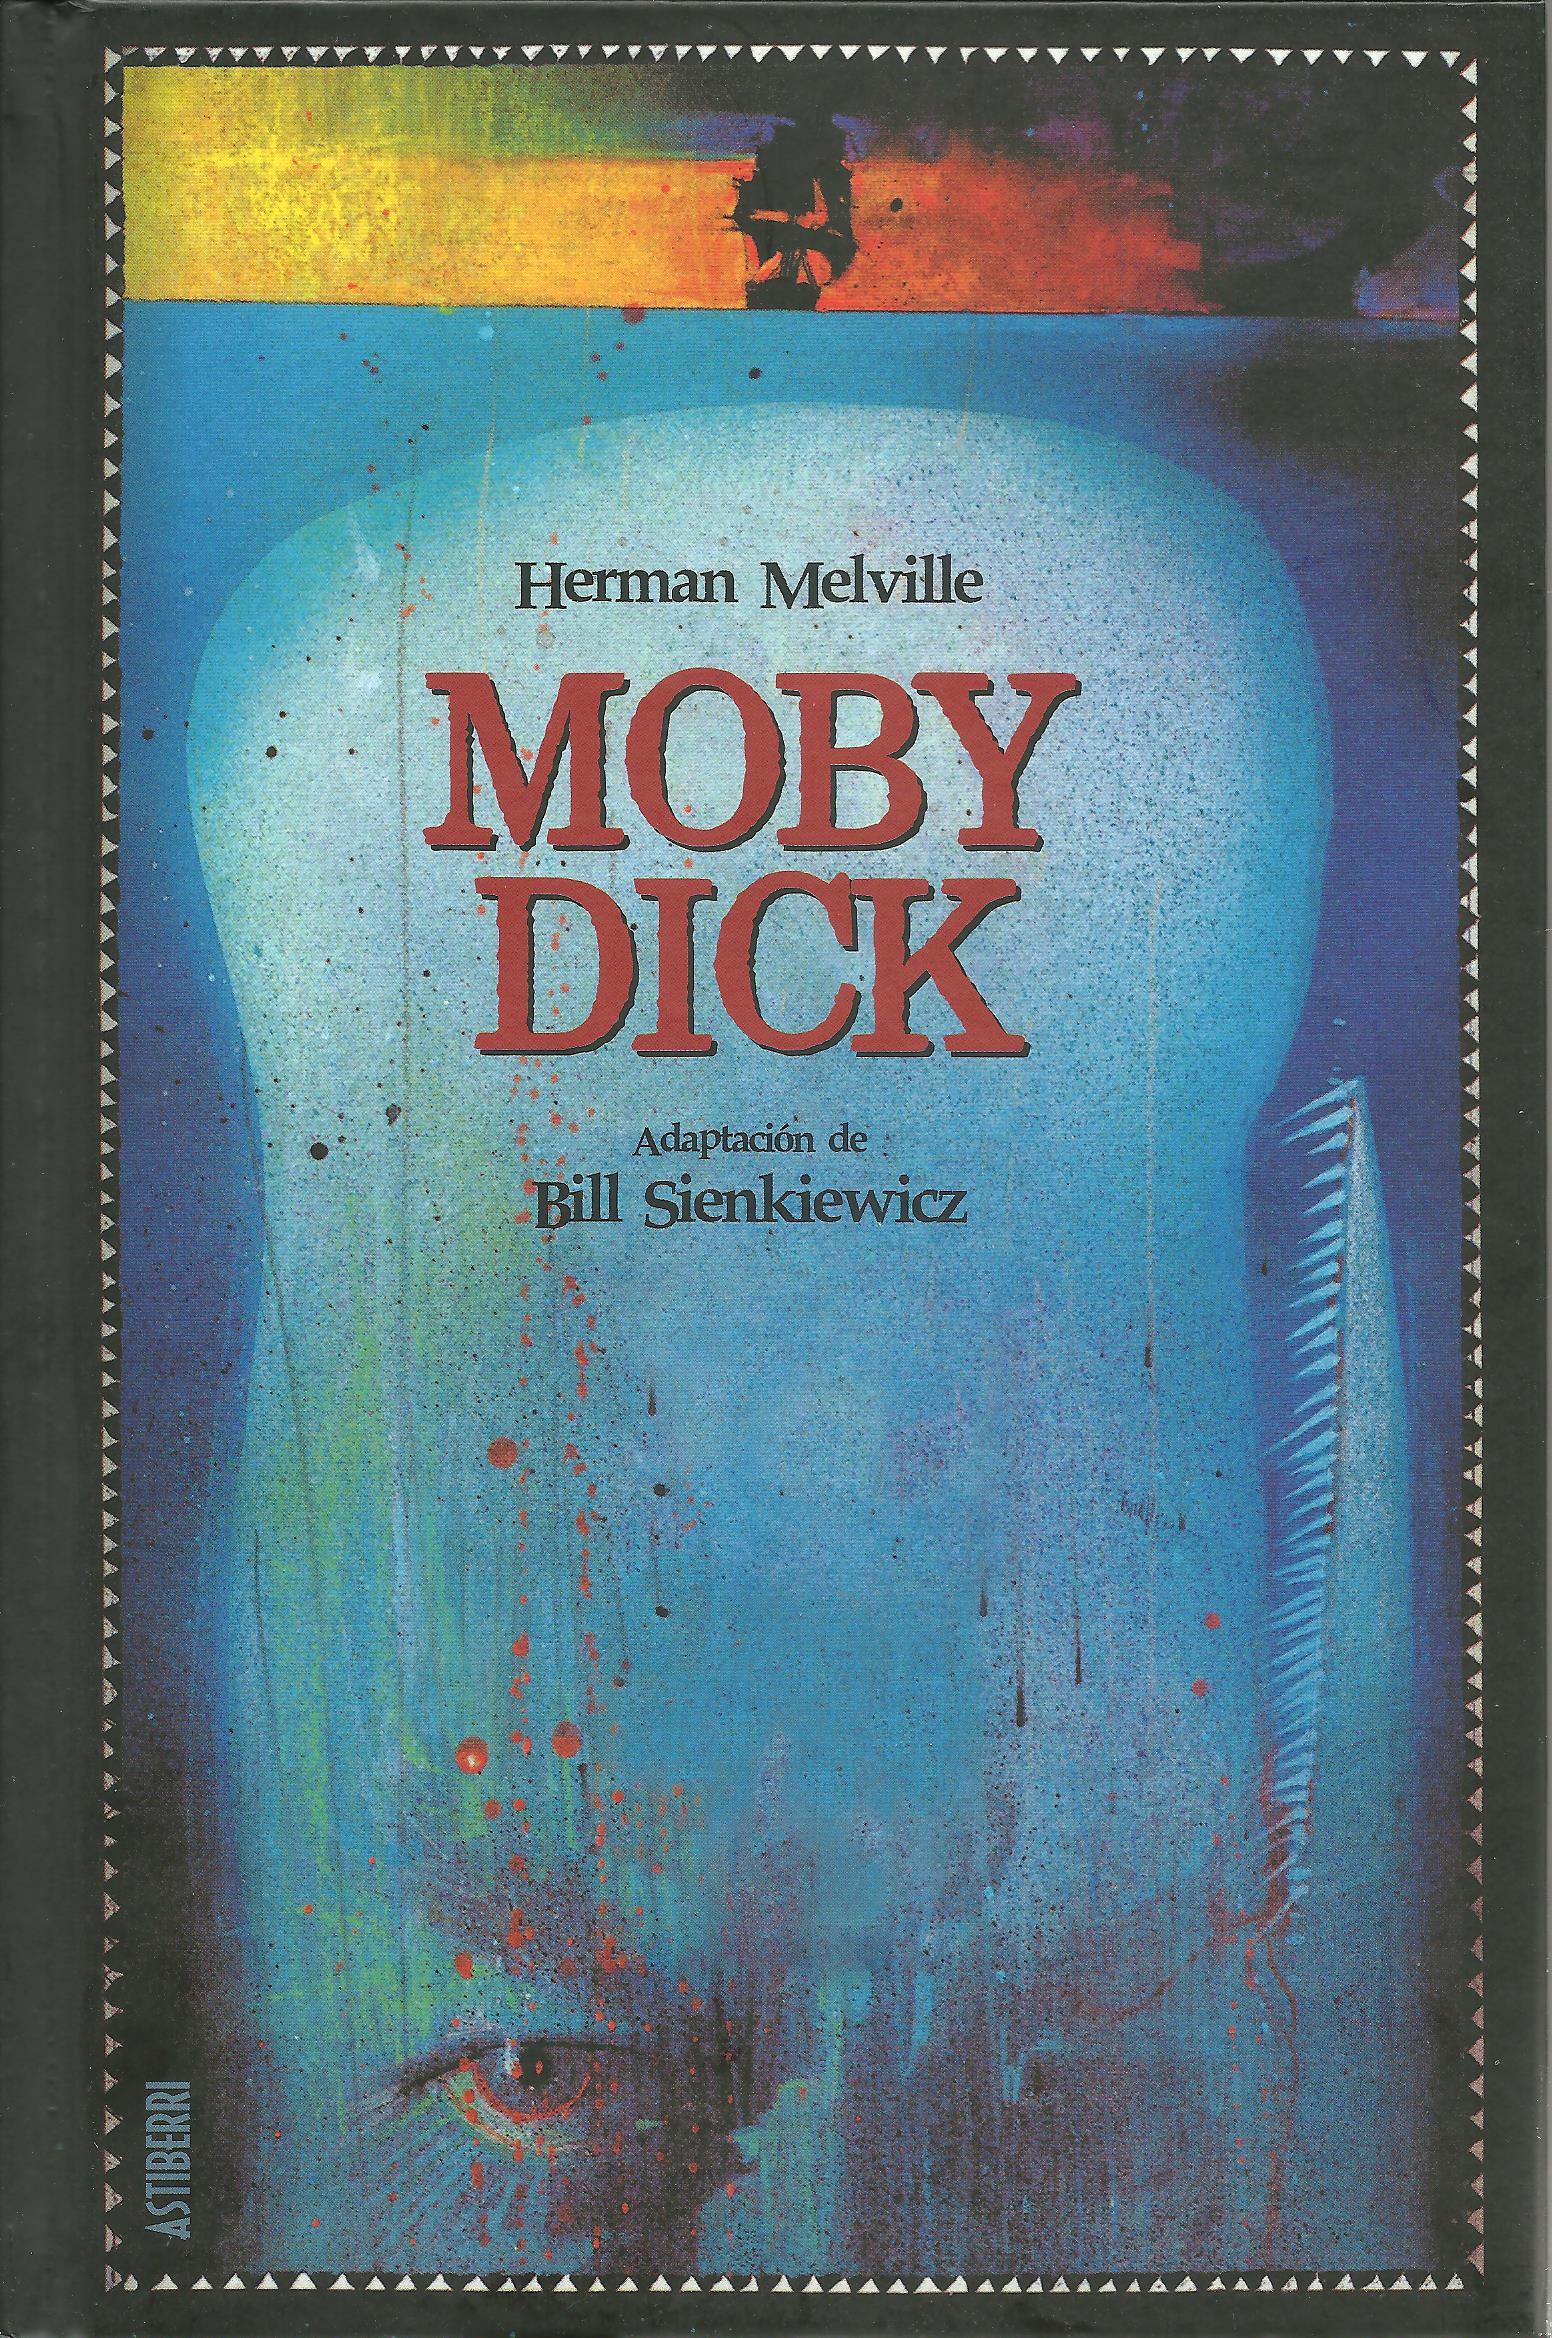 Moby Dick.1